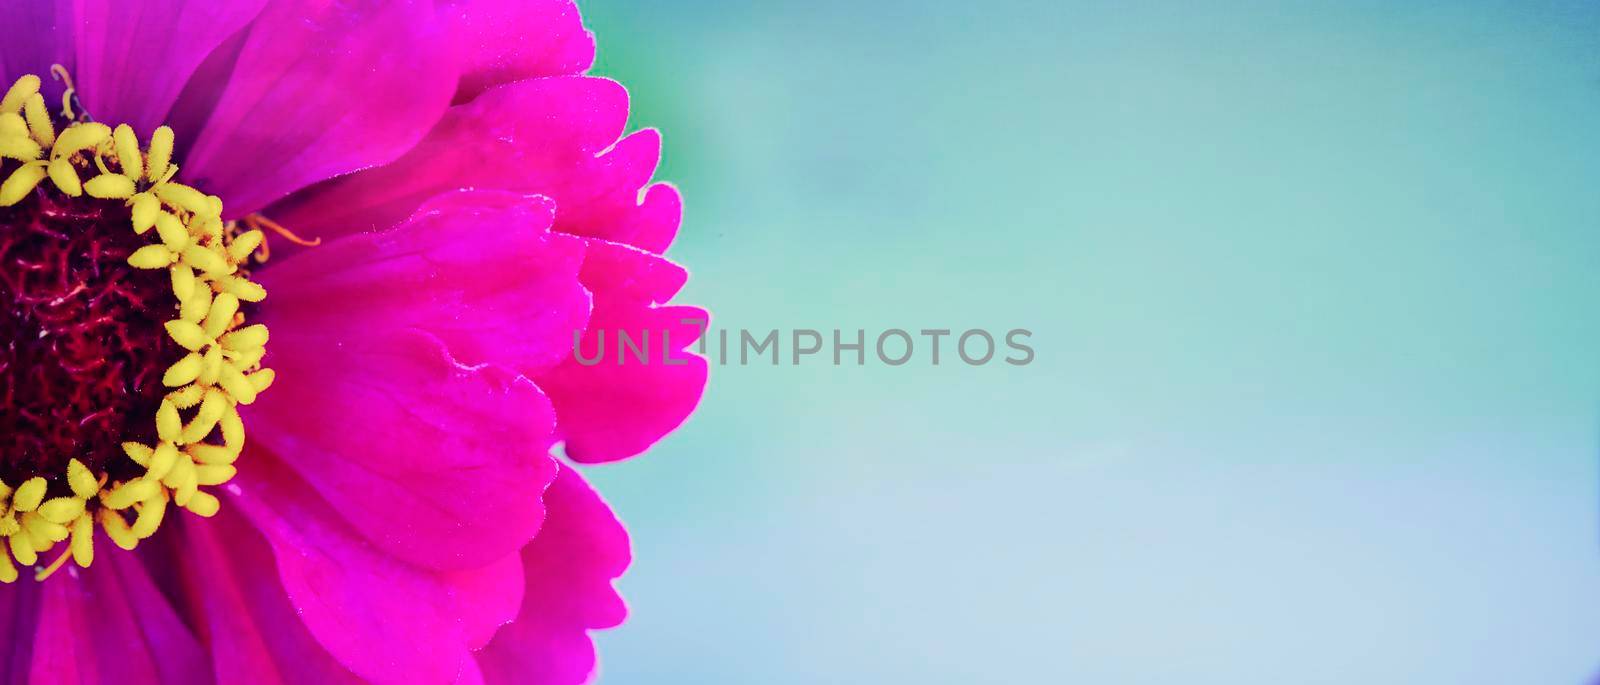 Beautiful pink flower with a yellow core close-up on a green background.